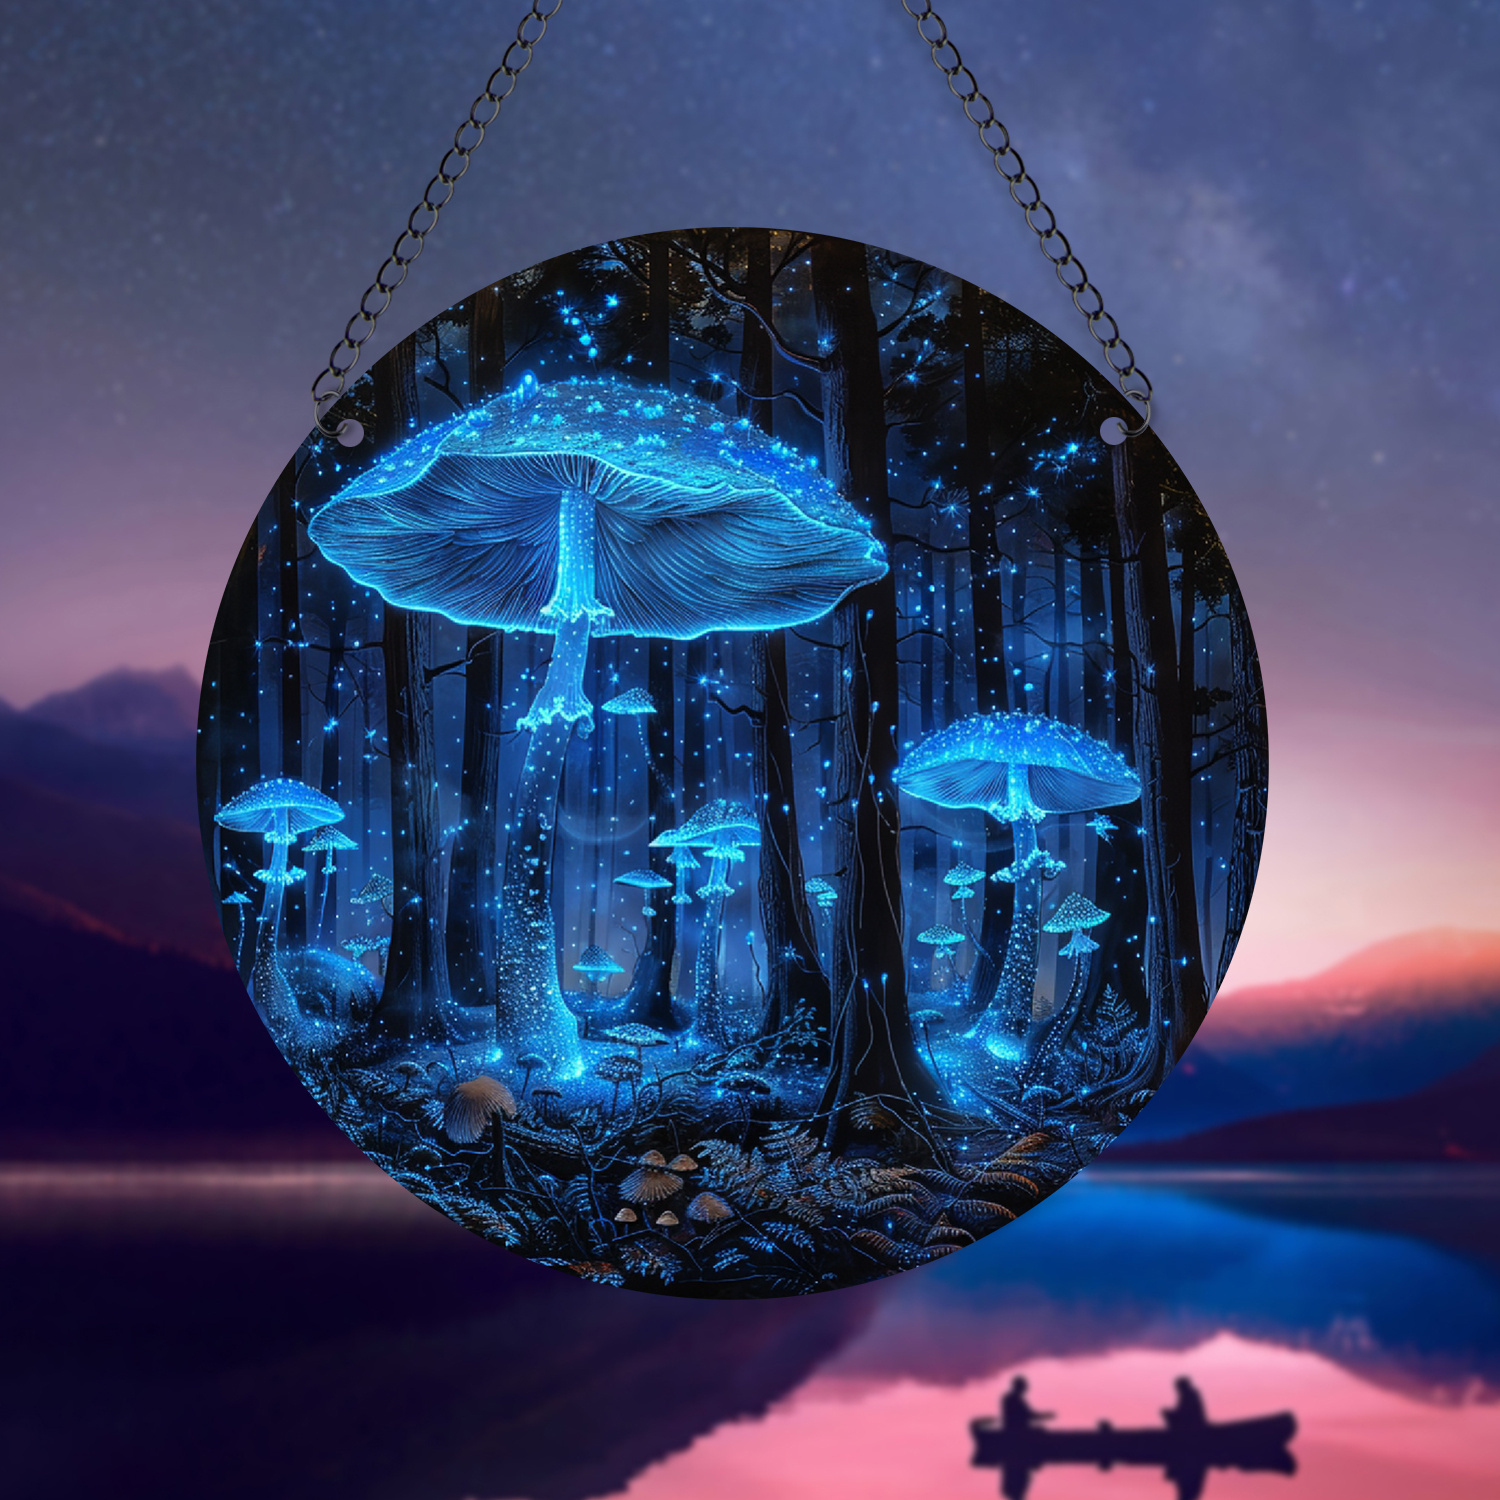 

Mystical Glow-in-the-dark Mushroom Acrylic Suncatcher Plaque 15x15cm - Multipurpose Classic Style Wall Hanging Decor For Home, Garden, Art Room, Festival, Birthday Gift Without Electricity